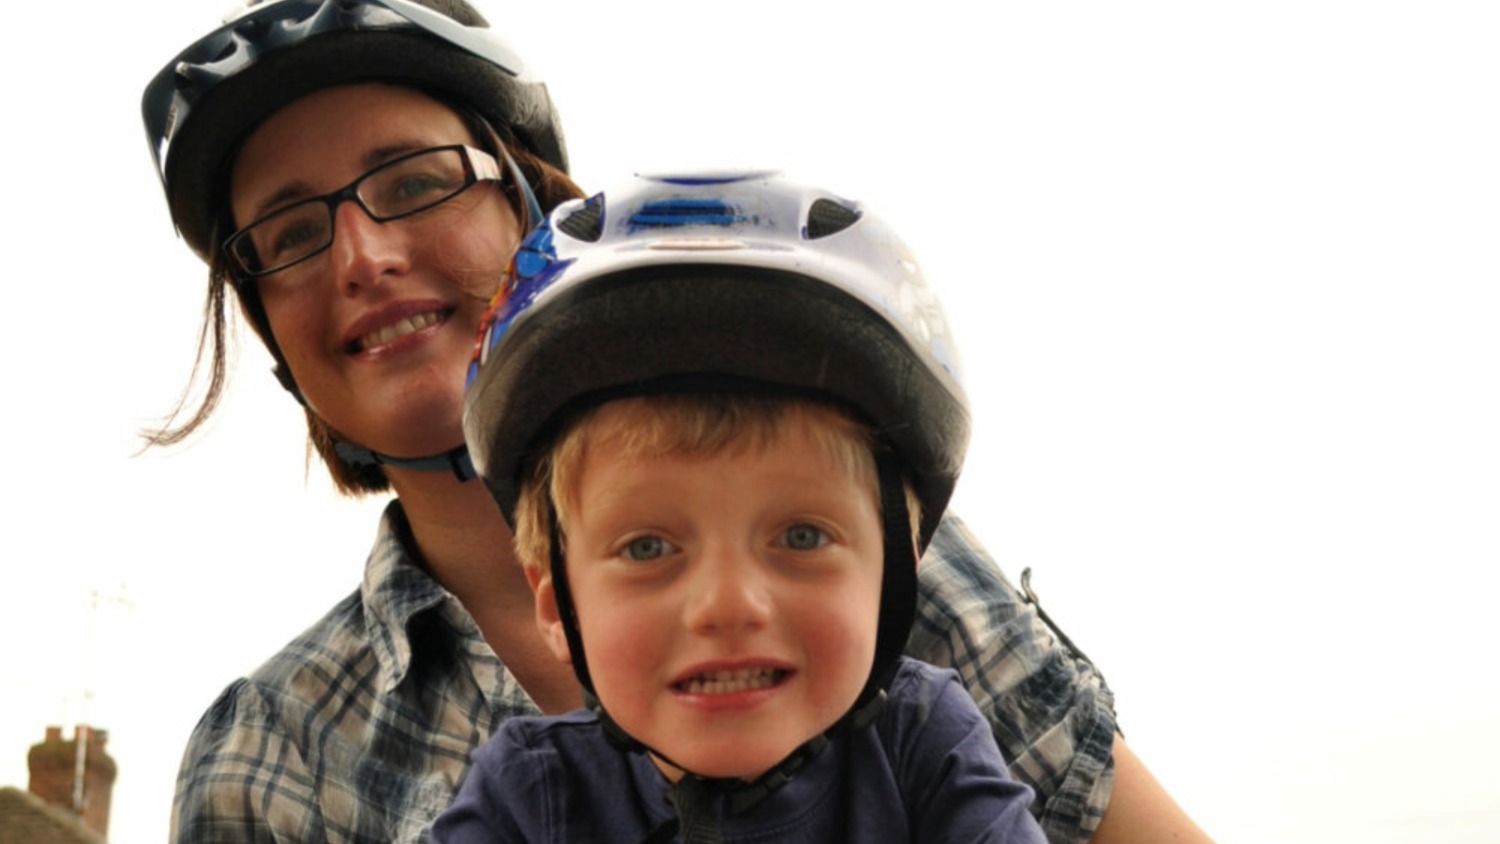 A front view of Karen Gee and her small son, in a front-mounted bike seat